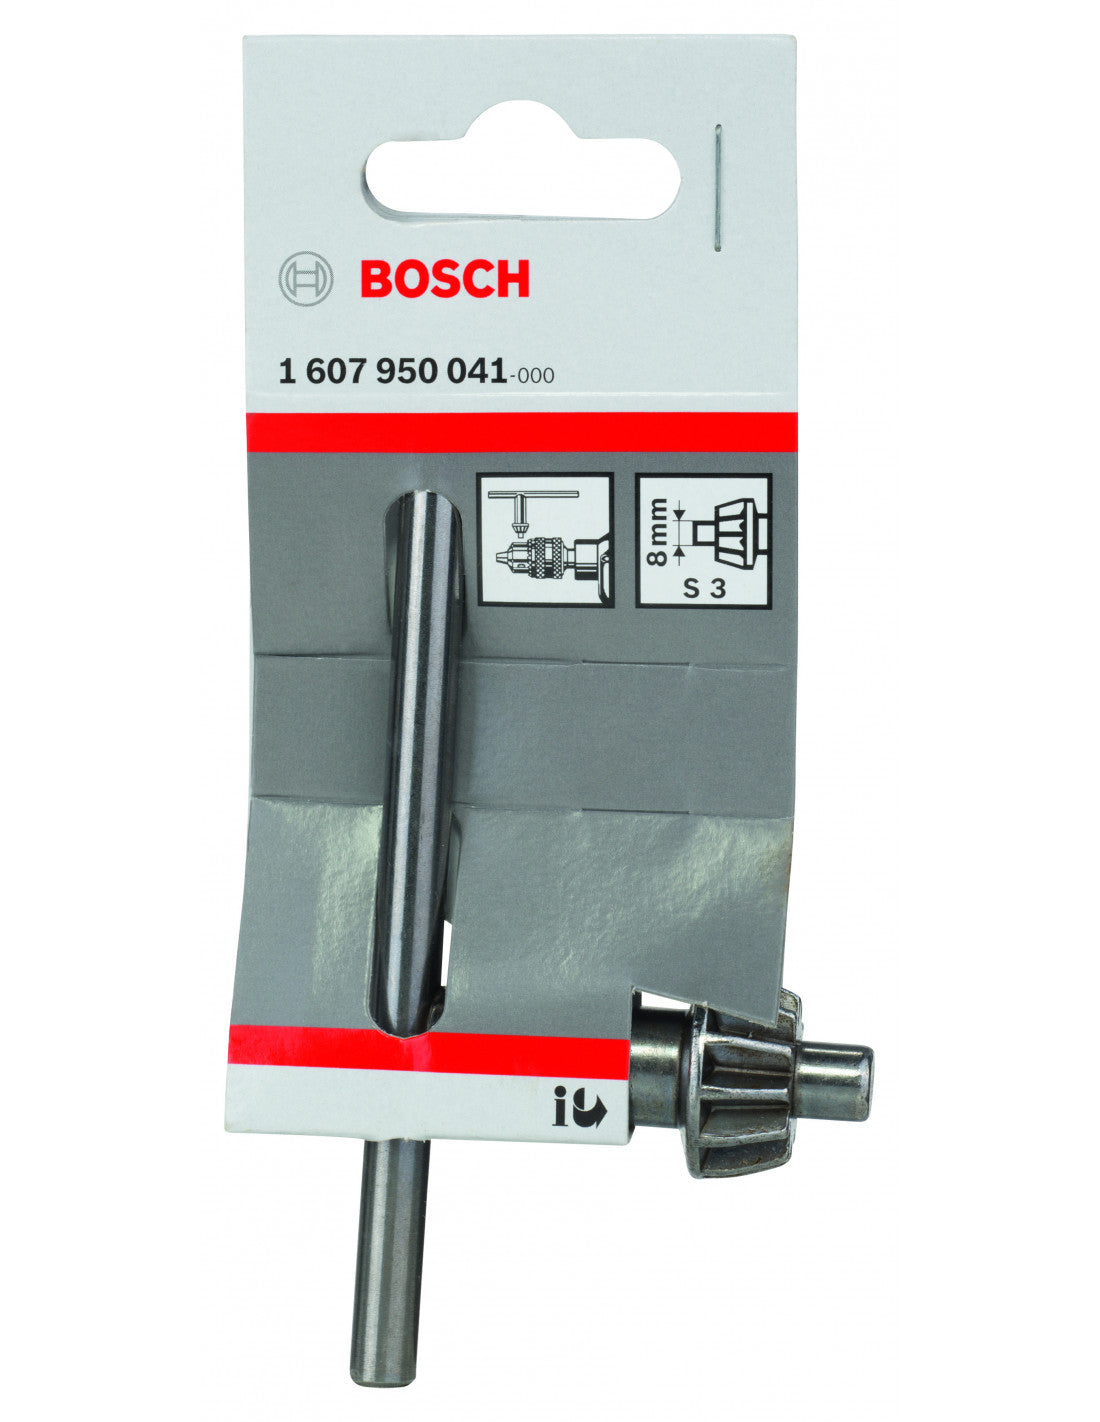 Bosch Replacement key for chucks S3, A, 110 mm, 50 mm, 4 mm, 8 mm 1607950041 Power Tool Services